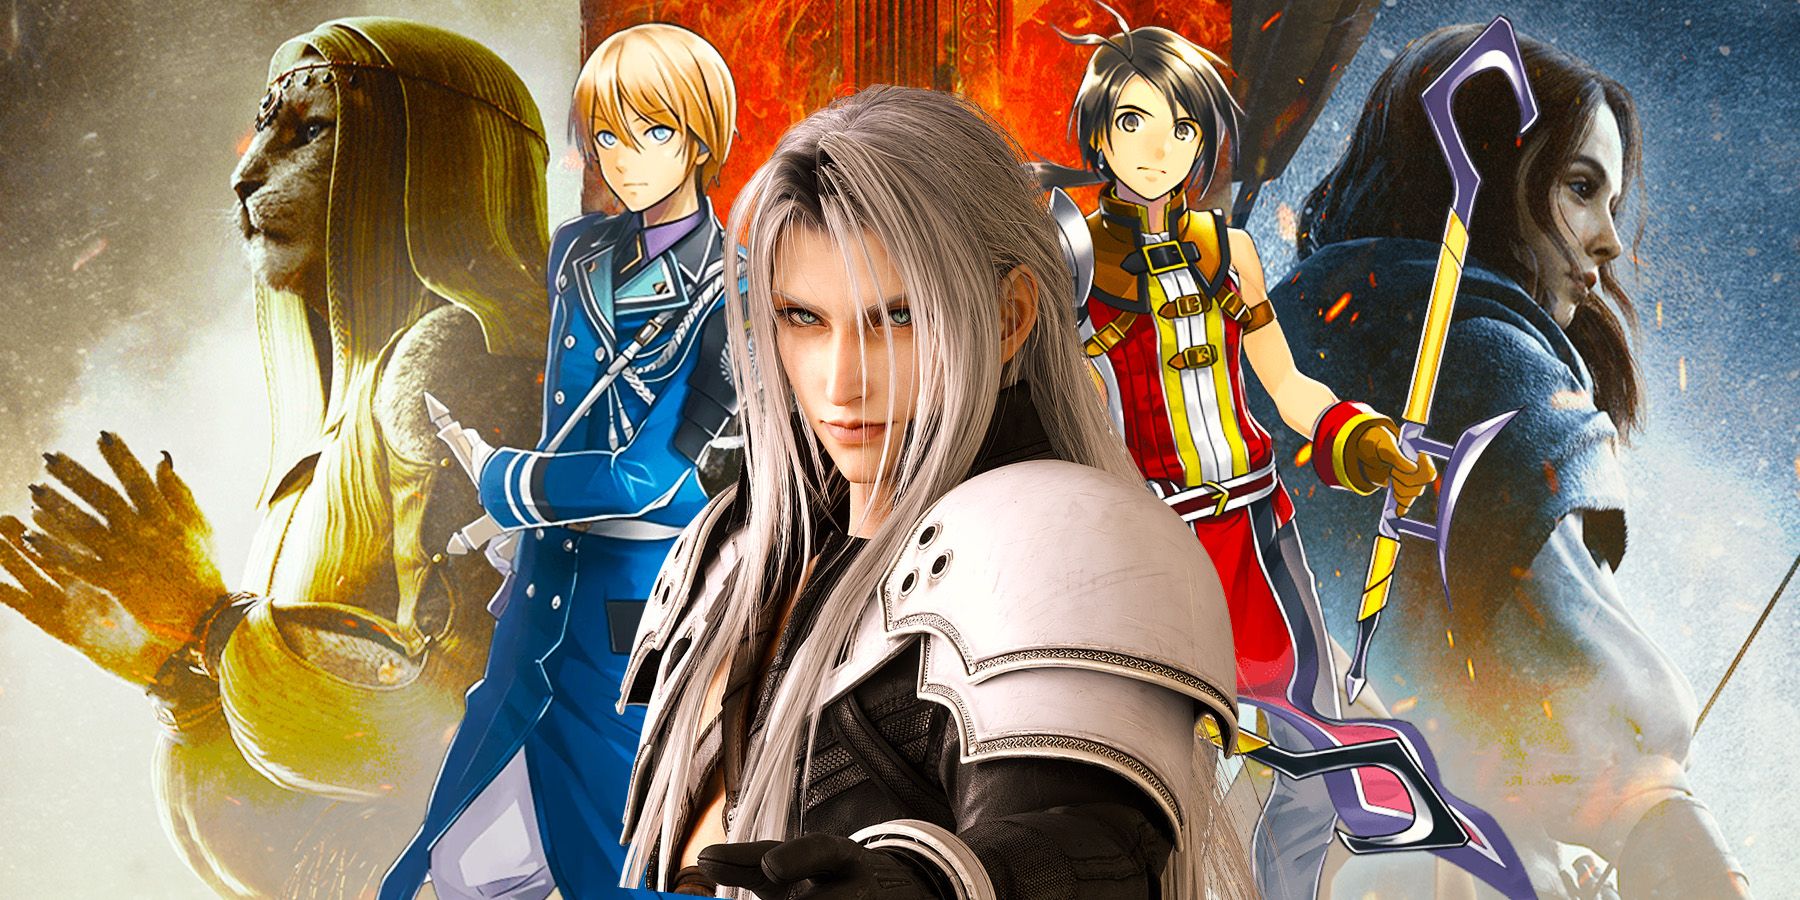 Characters from Final Fantasy VII Rebirth, Dragon's Dogma 2, Eiyuden Chronicle Hundred Heroes, and Granblue Fantasy Relink.